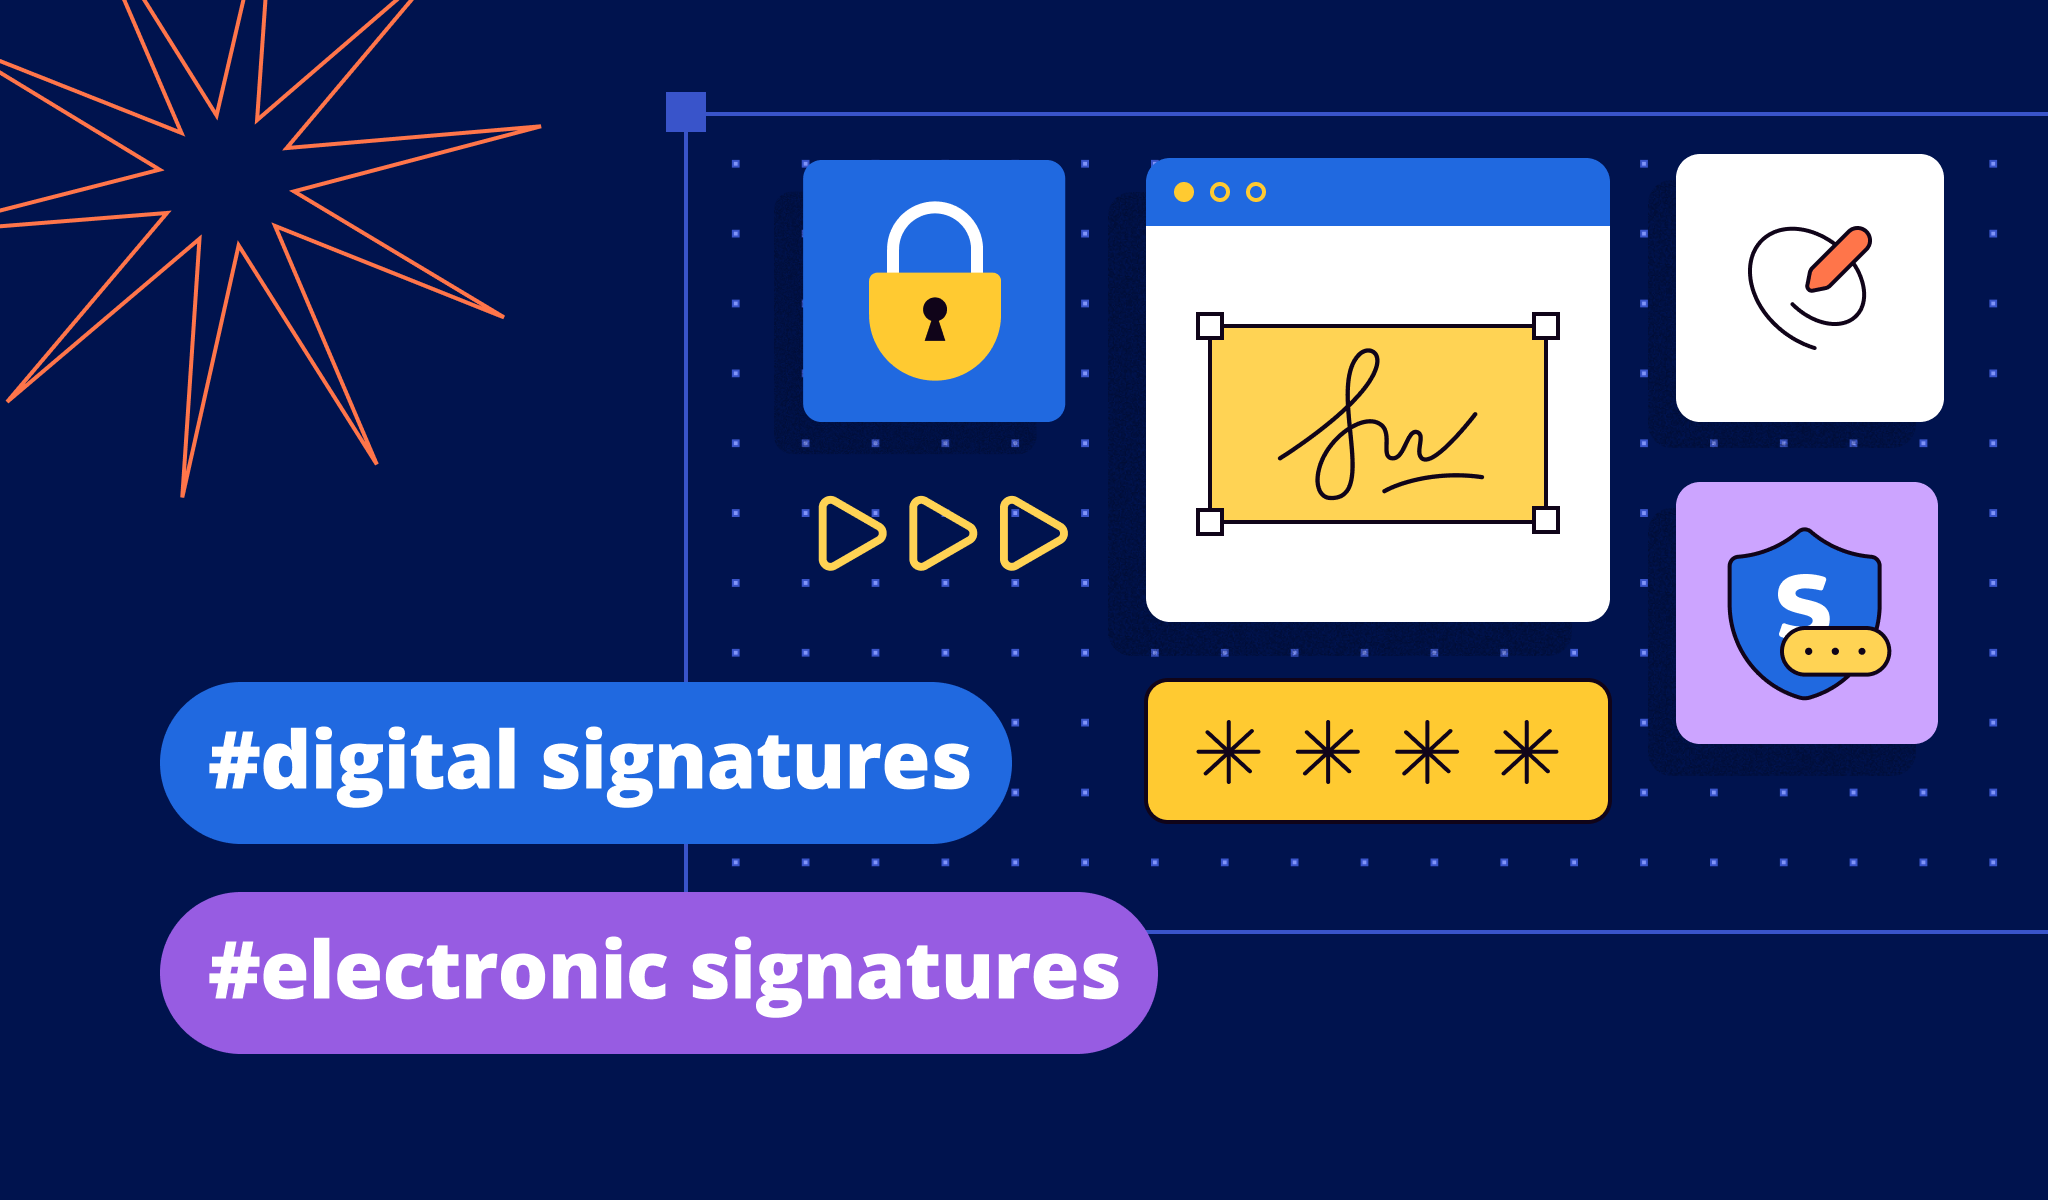 signNow introduces PKI certificates. Learn more about signNow's digital signature capabilities!